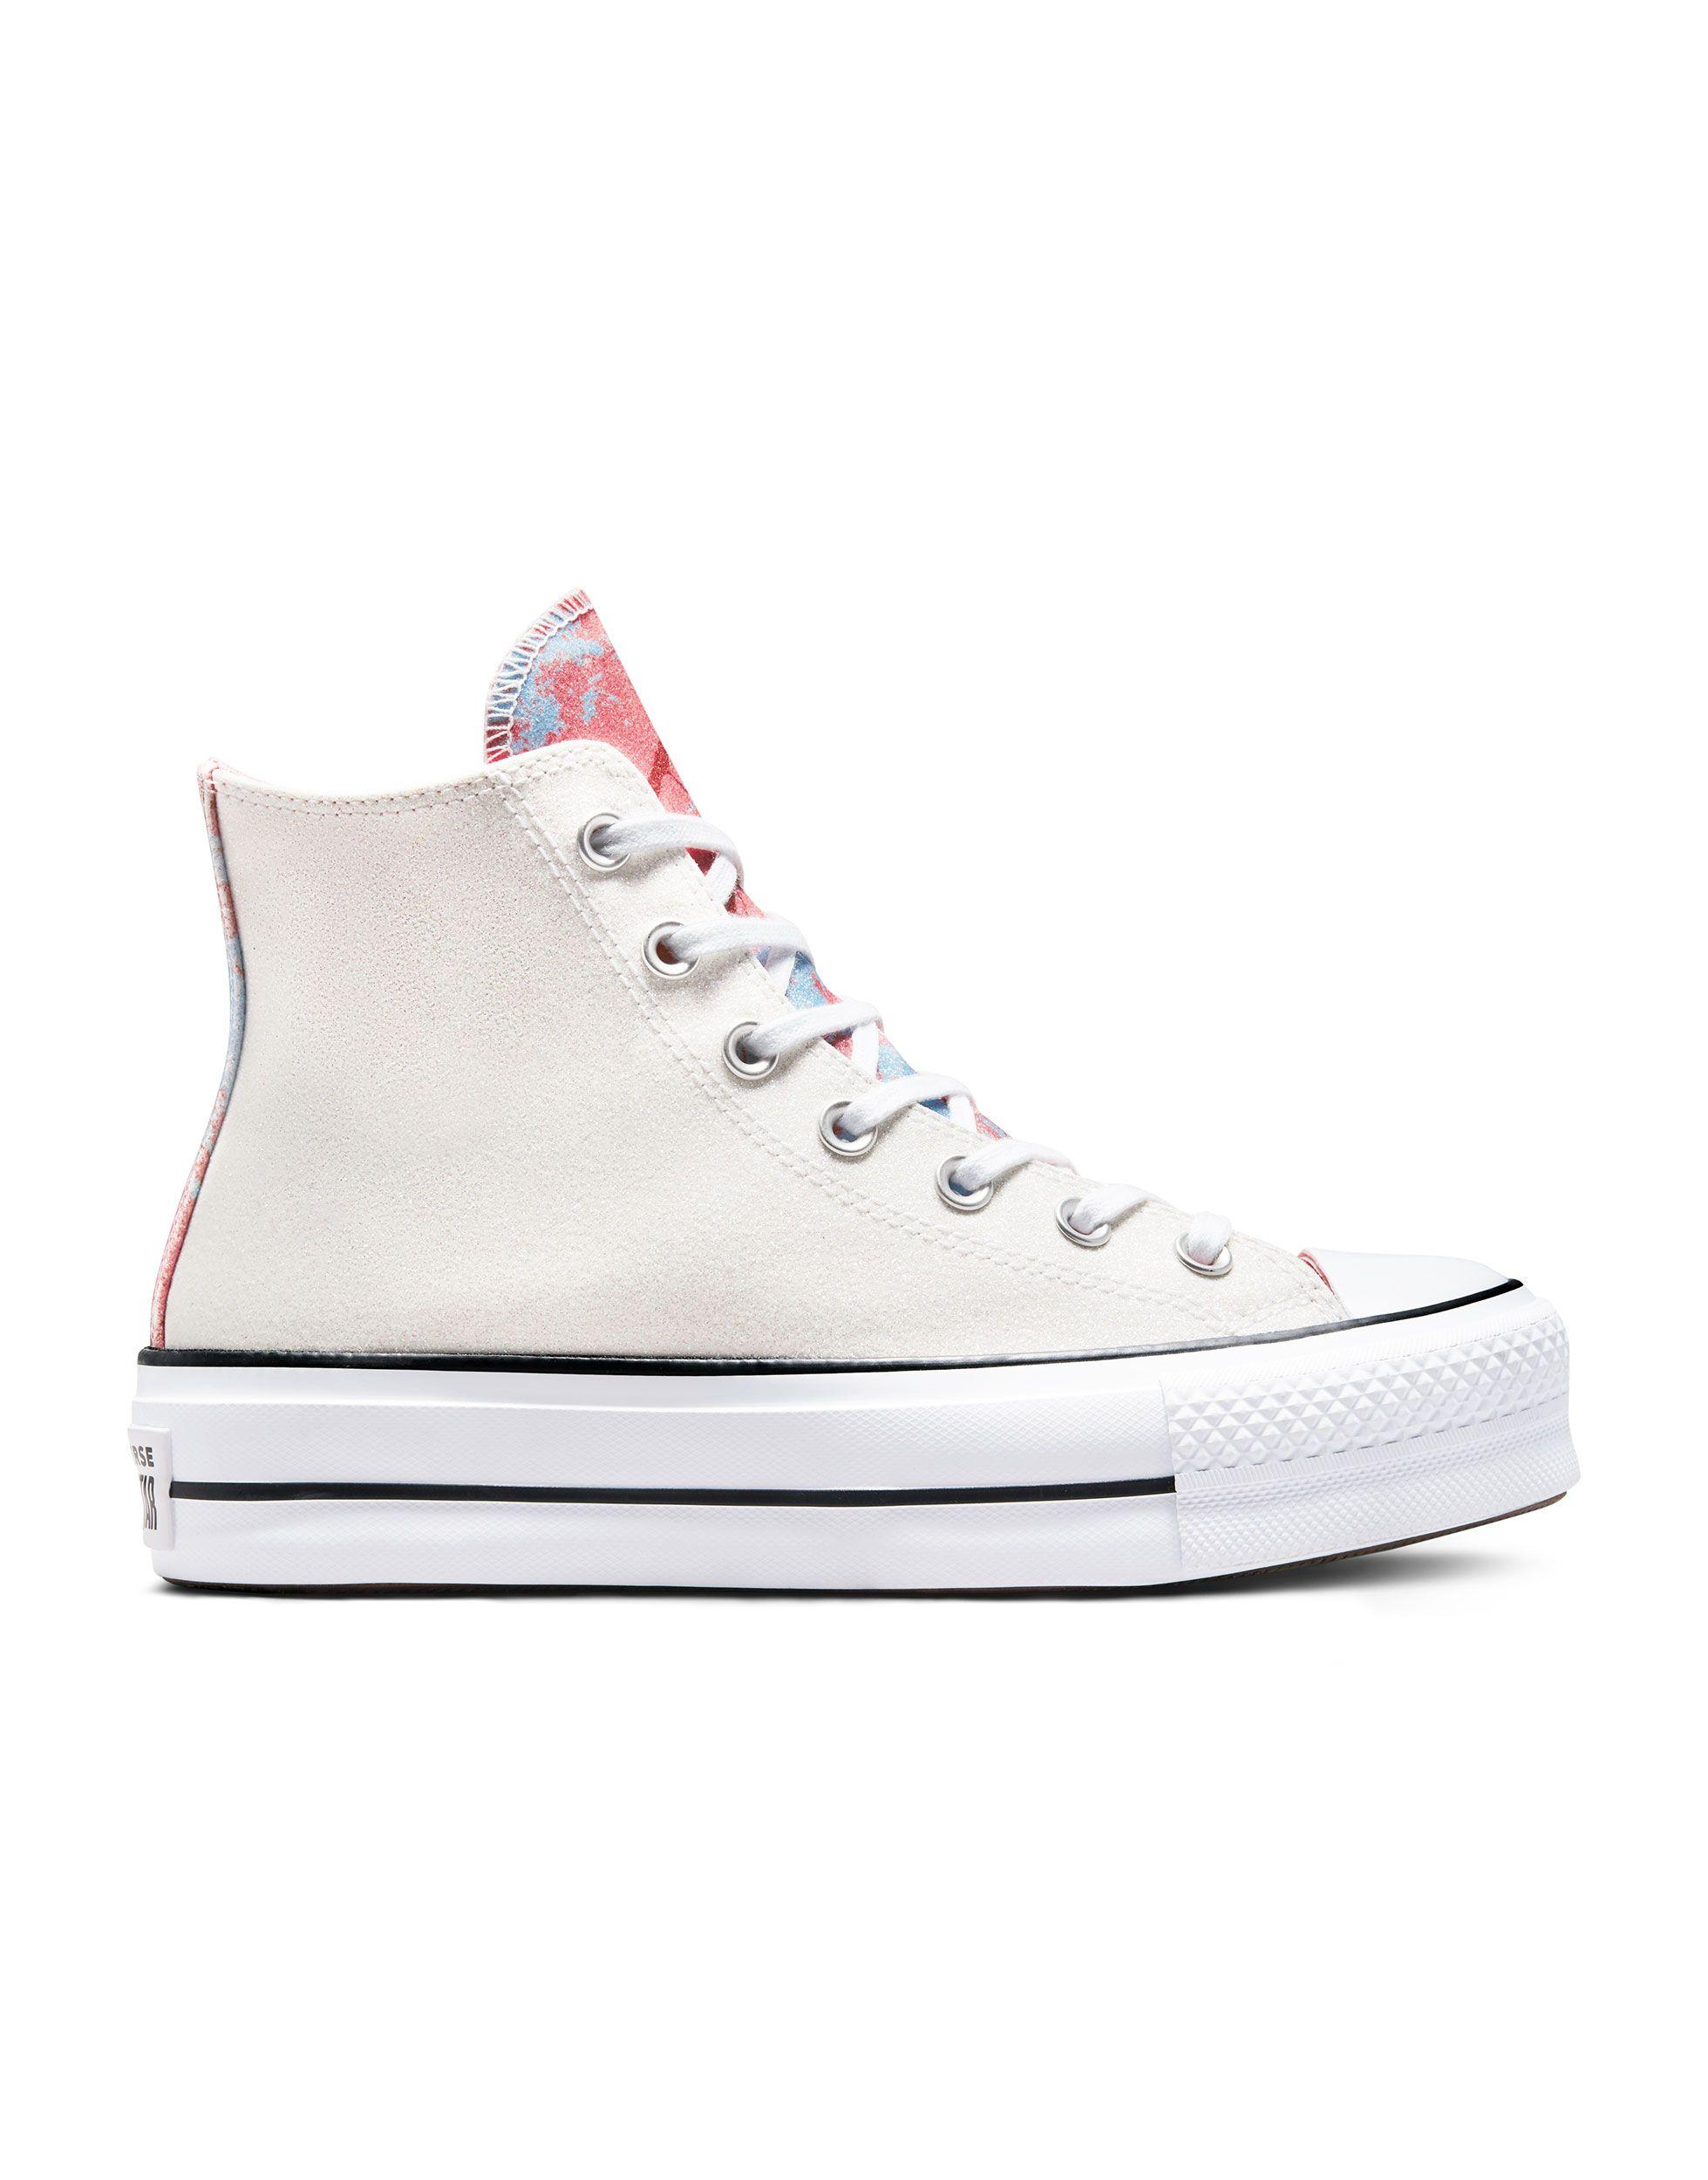 Converse Rubber Chuck Taylor All Star Ox Lift Hybrid Shine Glitter Platform  Sneakers in White | Lyst